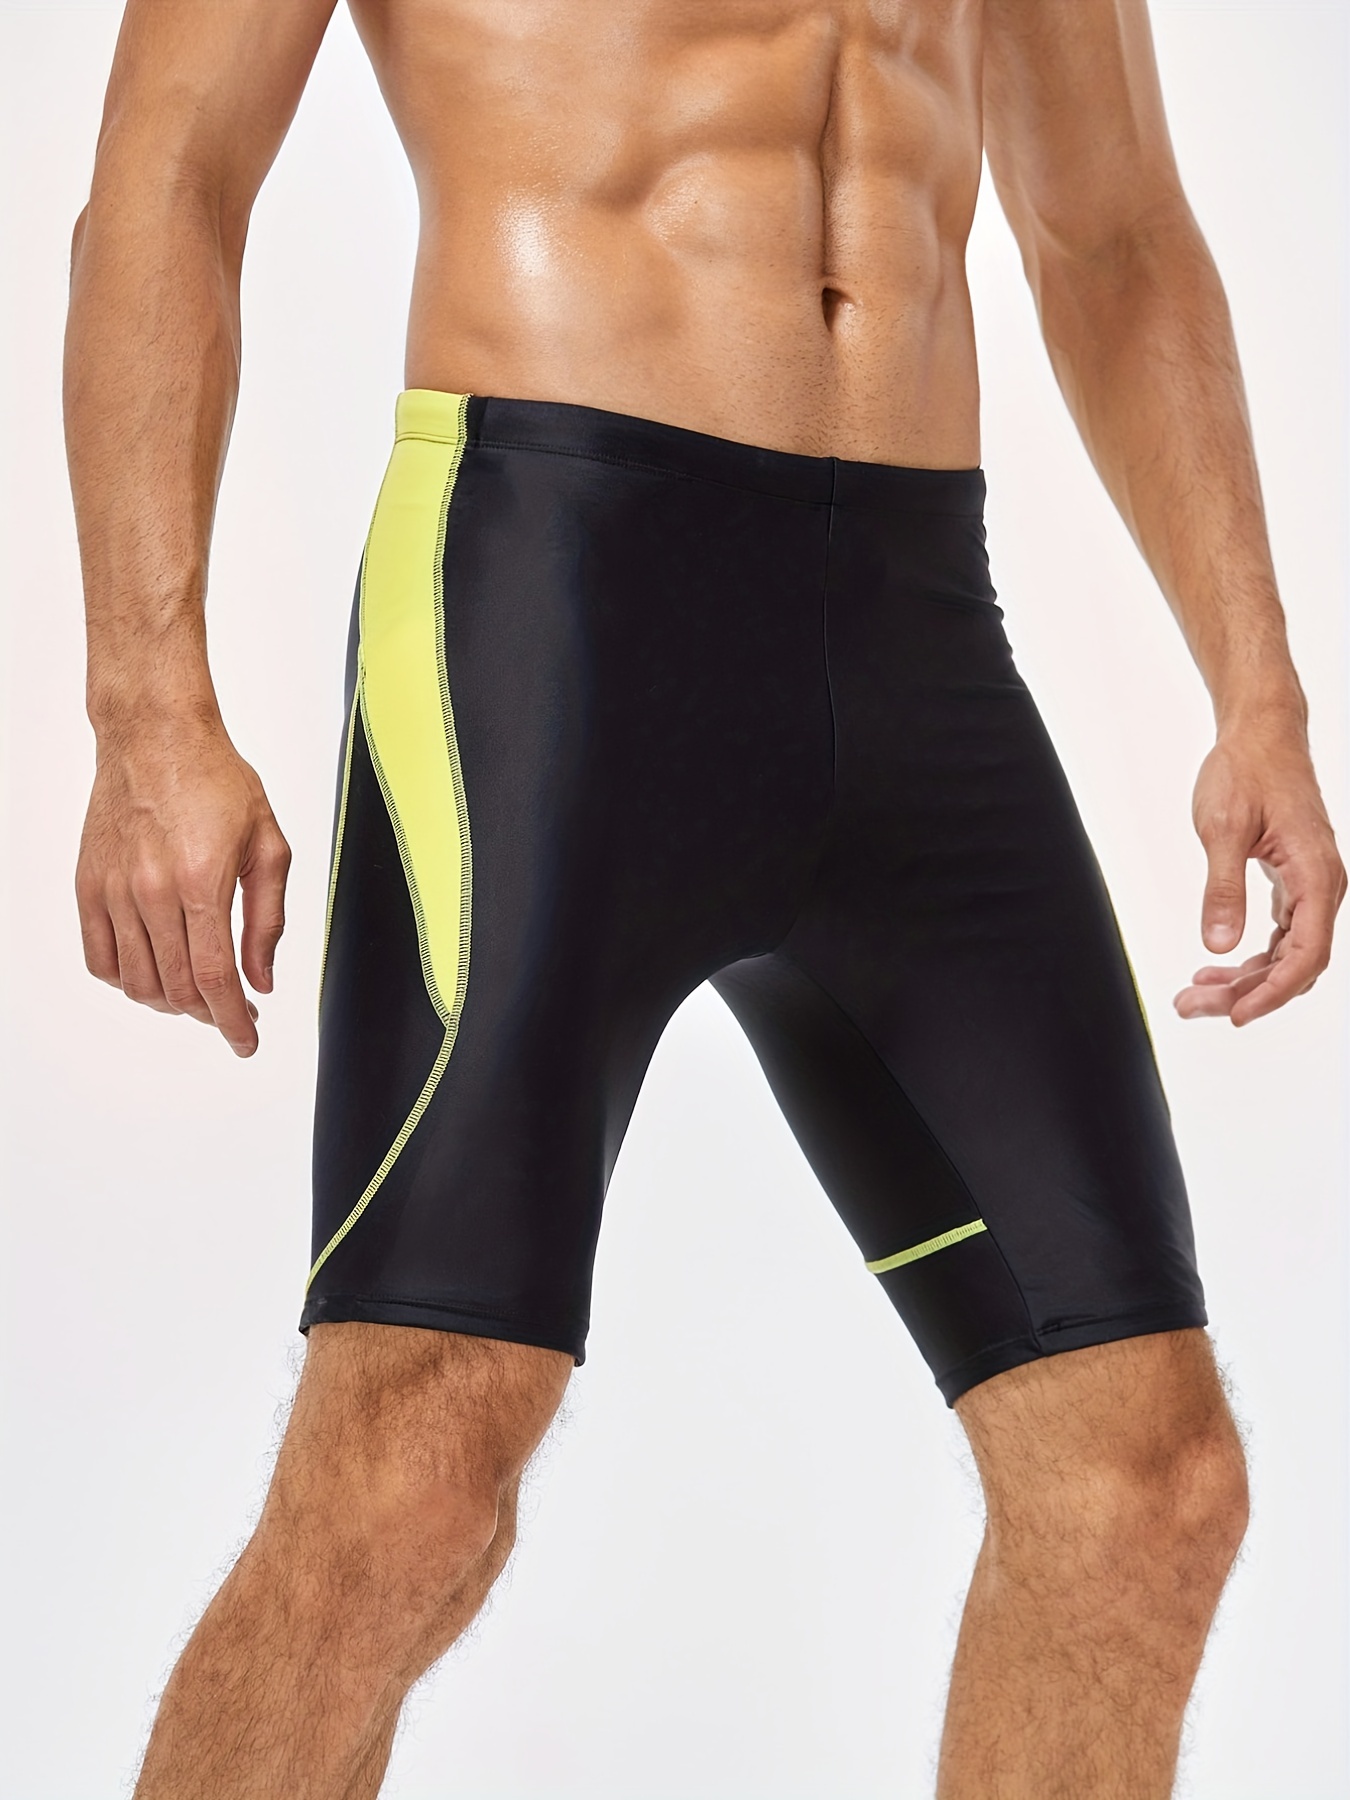 Quick Dry Compression Swimsuit for Men - Enhance Performance and Comfort in Competitive Swimming